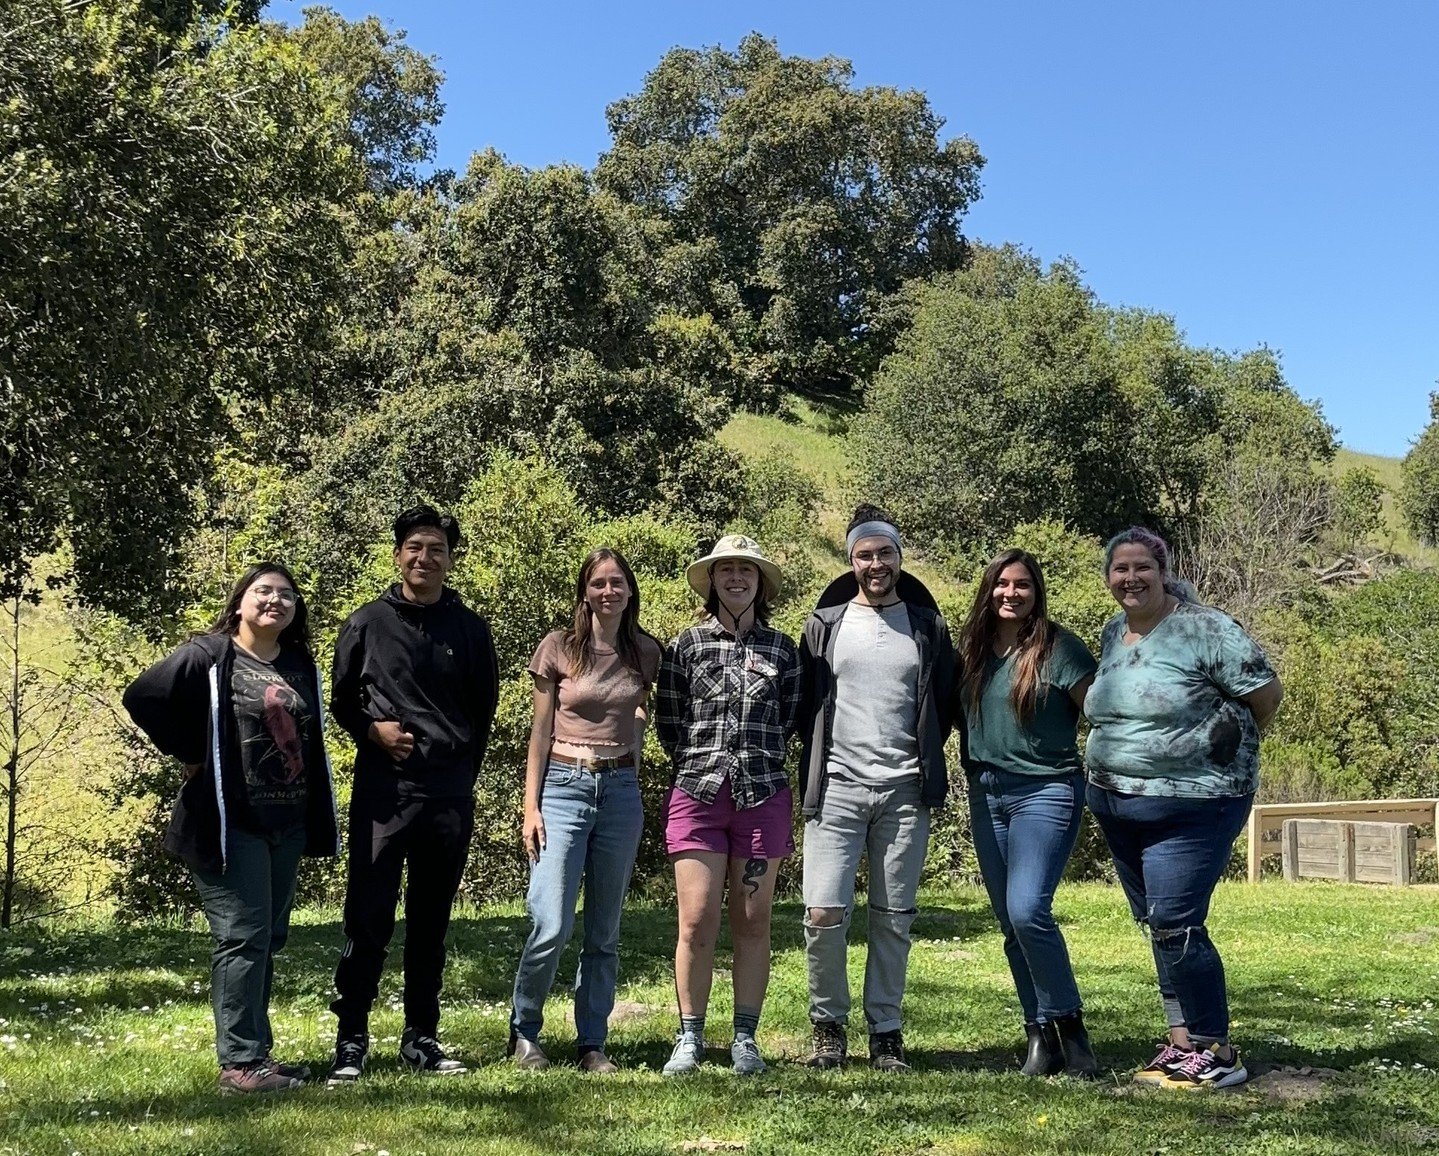 Want to know what Bird School Project has been up to this spring? Check out our most recent newsletter for updates and to learn about all the Earth Day events happening this weekend!